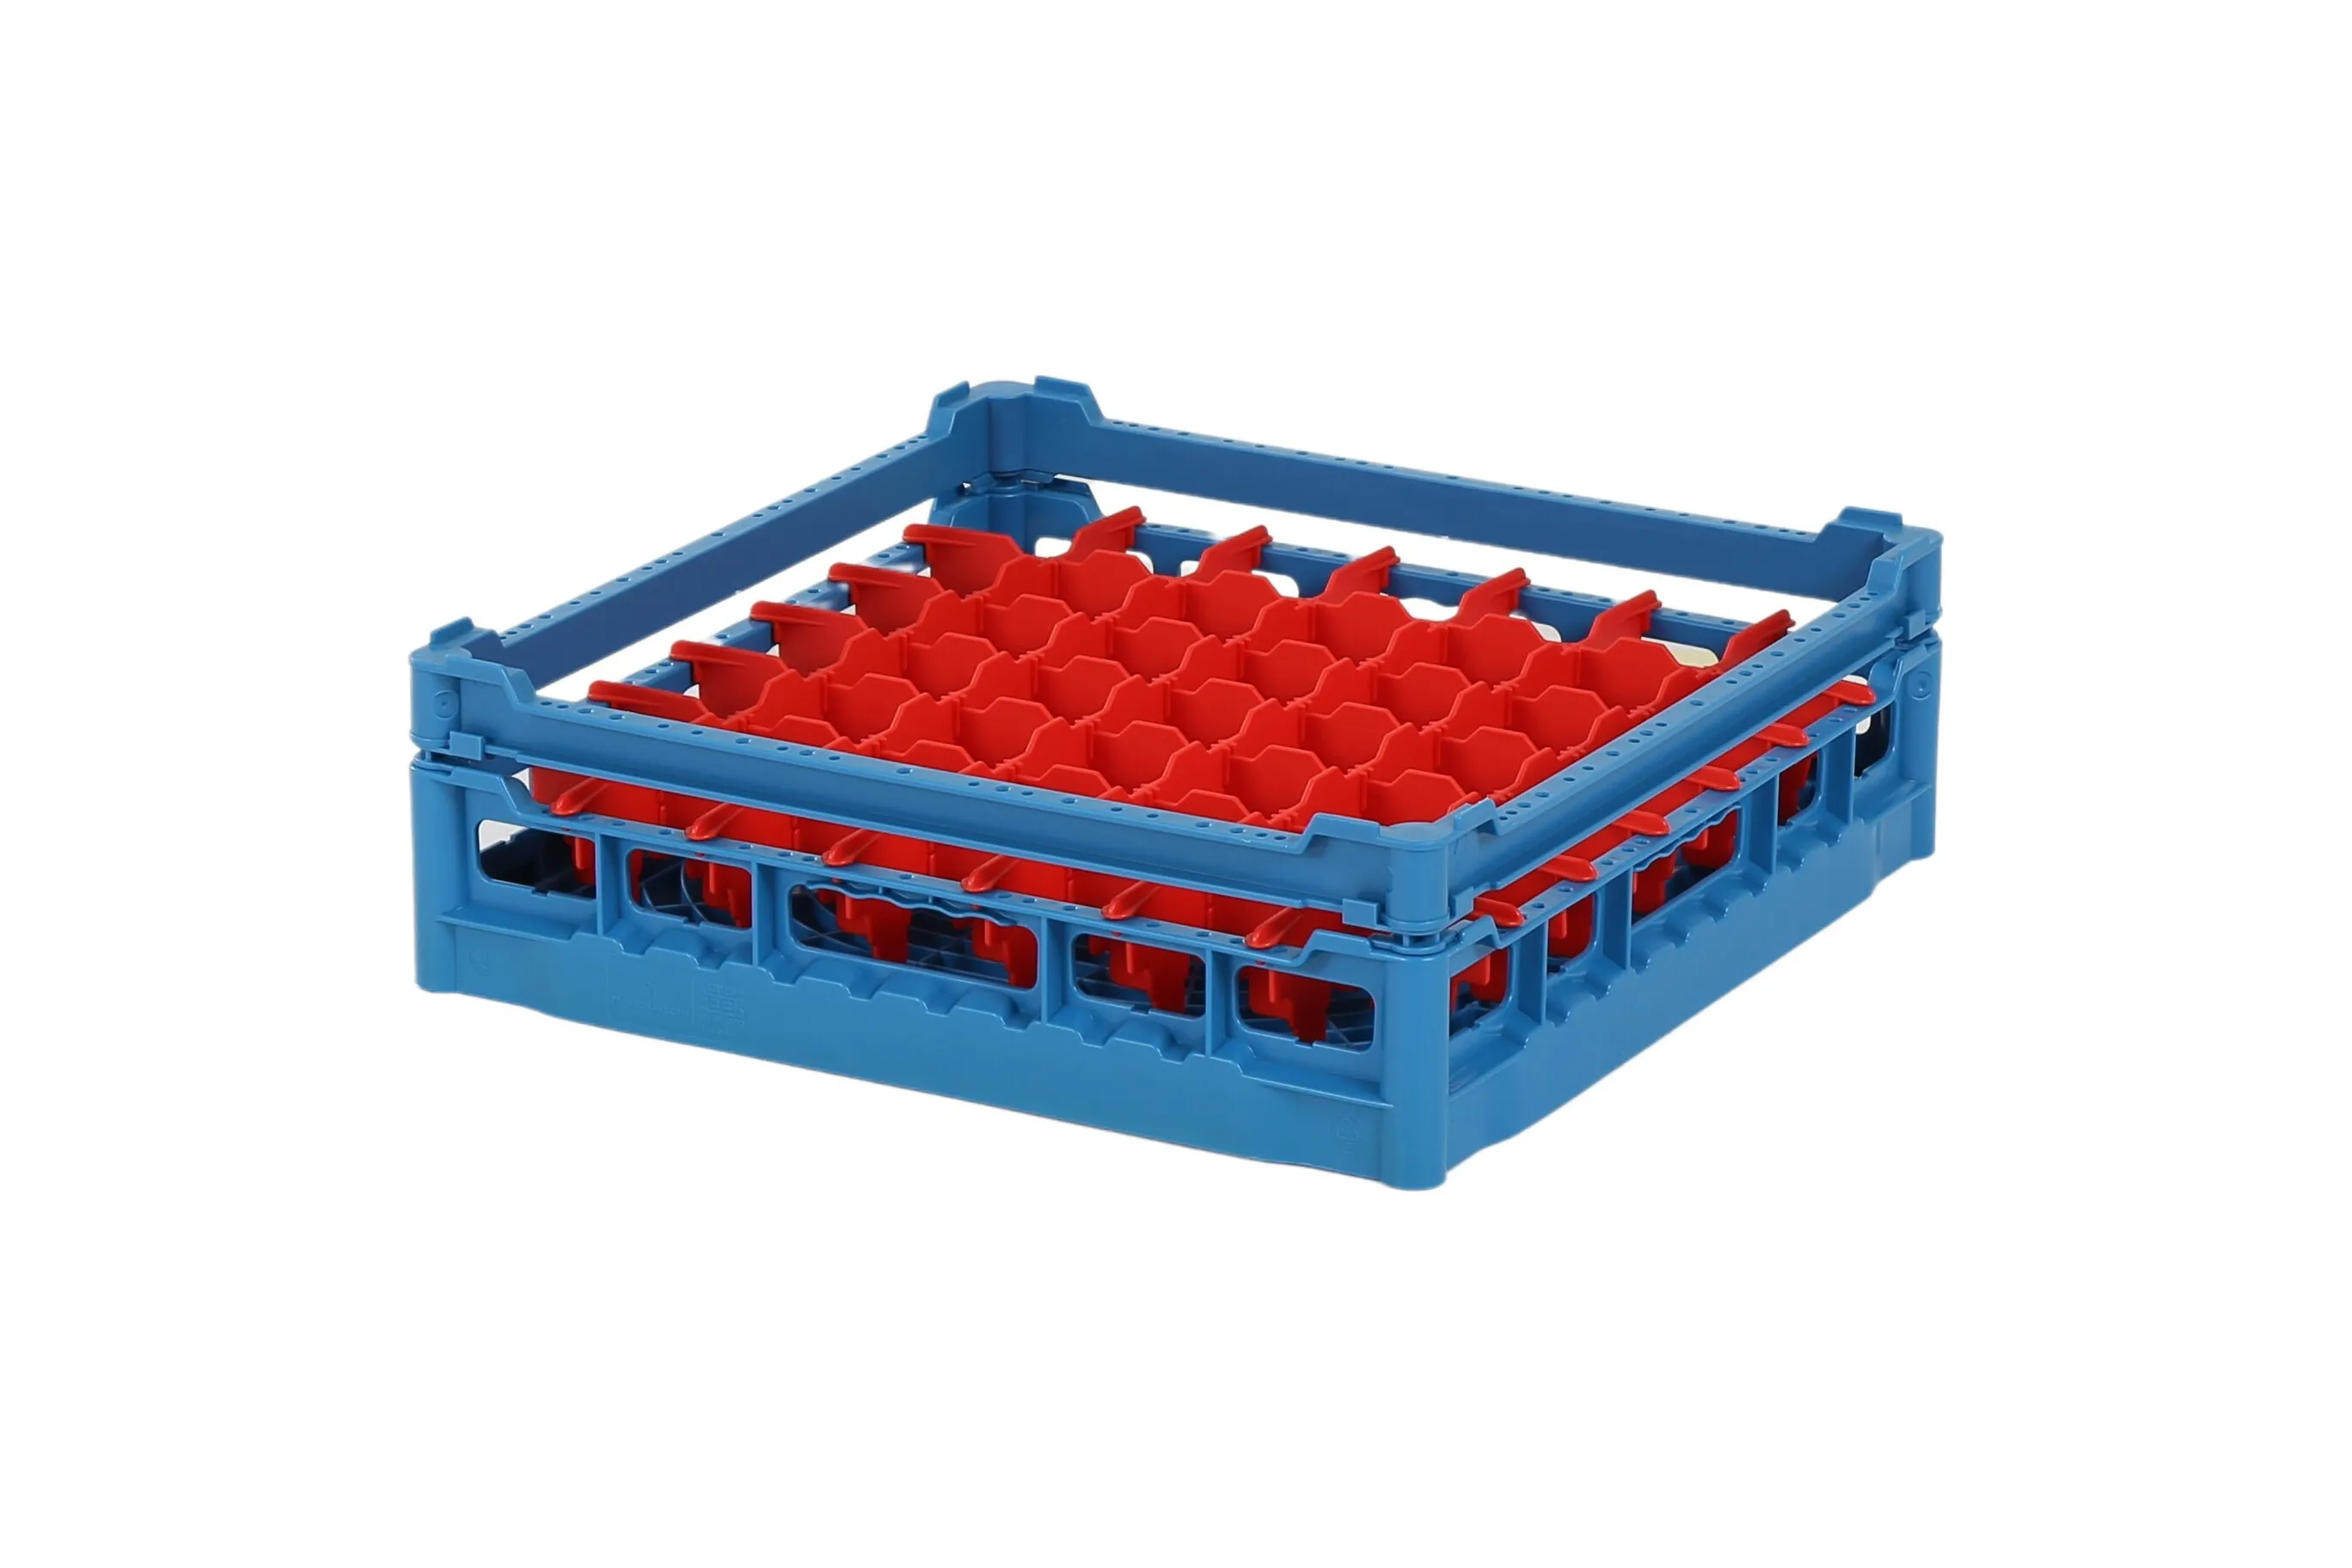 Glass basket 500x500mm blue - maximum glass height 110 mm - with red 7x7 compartment division - maximum glass diameter 63mm